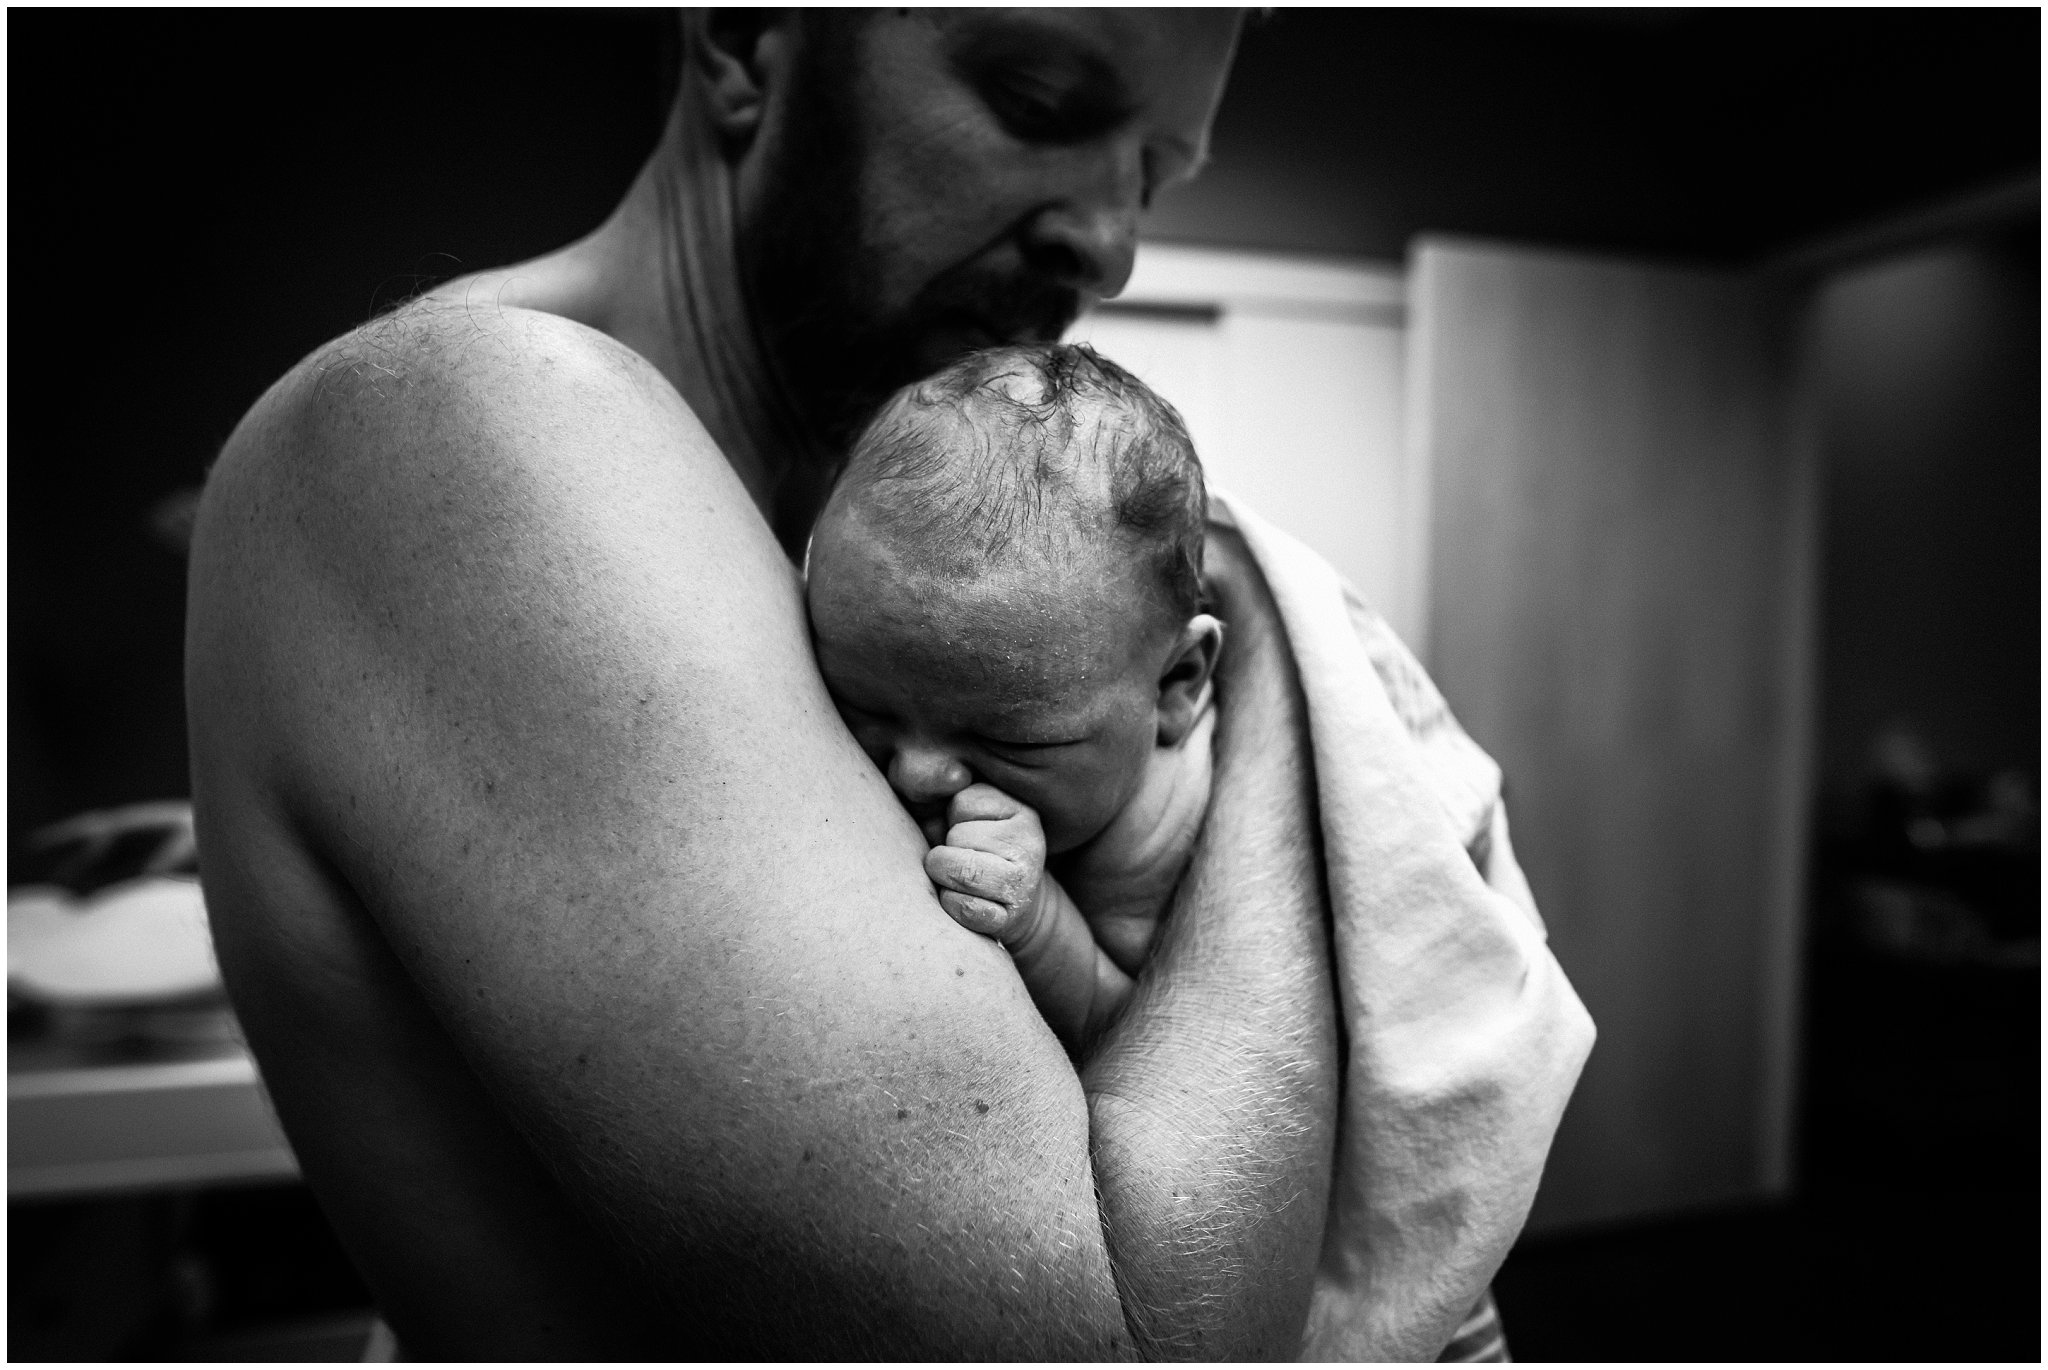 Birth photographer captures moment dad holds son for first time